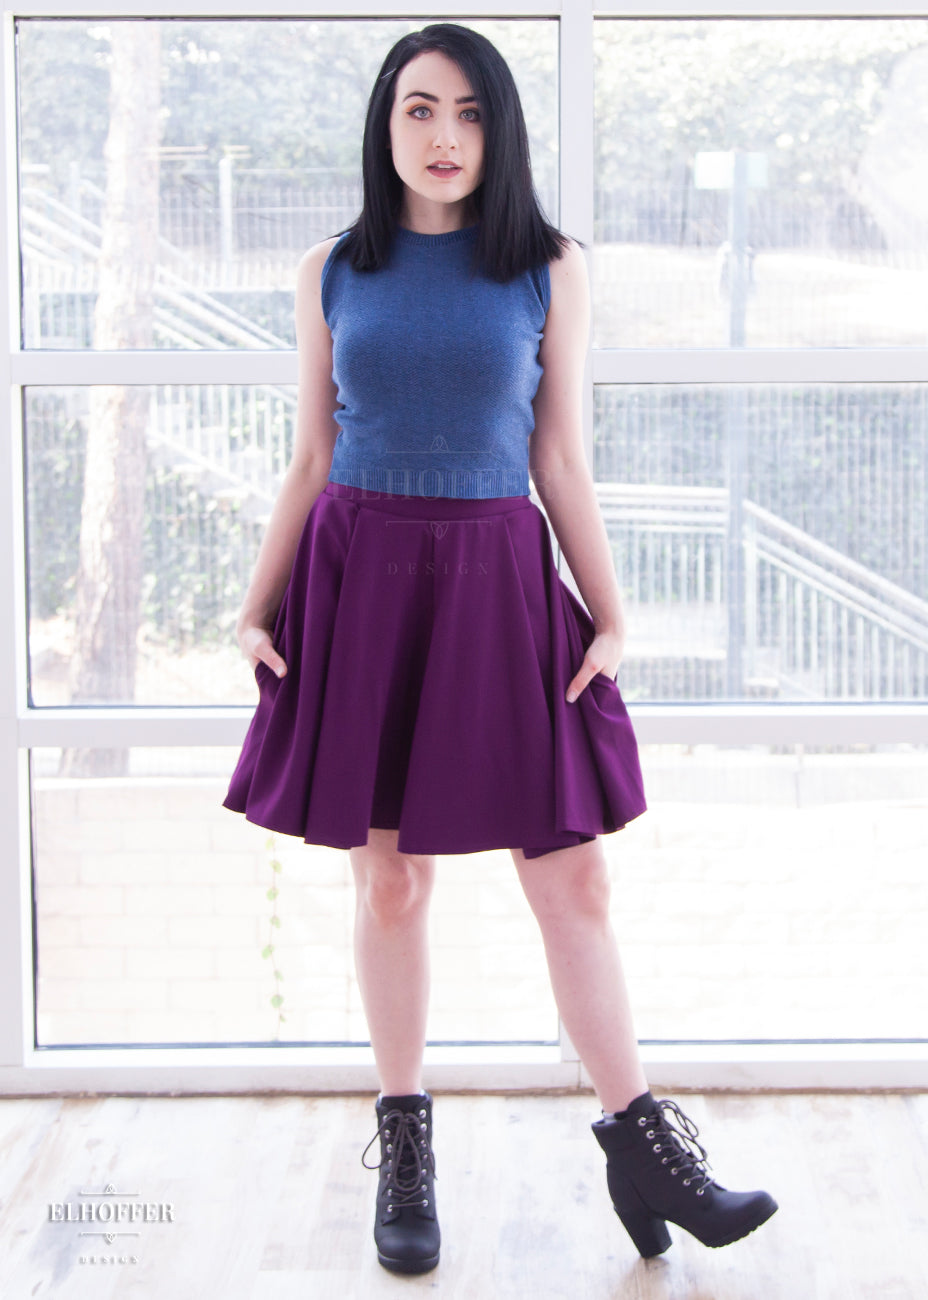 Amy (a fair skinned size medium model with short dark hair) models the knee length pleated plum purple skirt with pockets. She pairs it with a denim blue sleeveless knit Susan crop top.